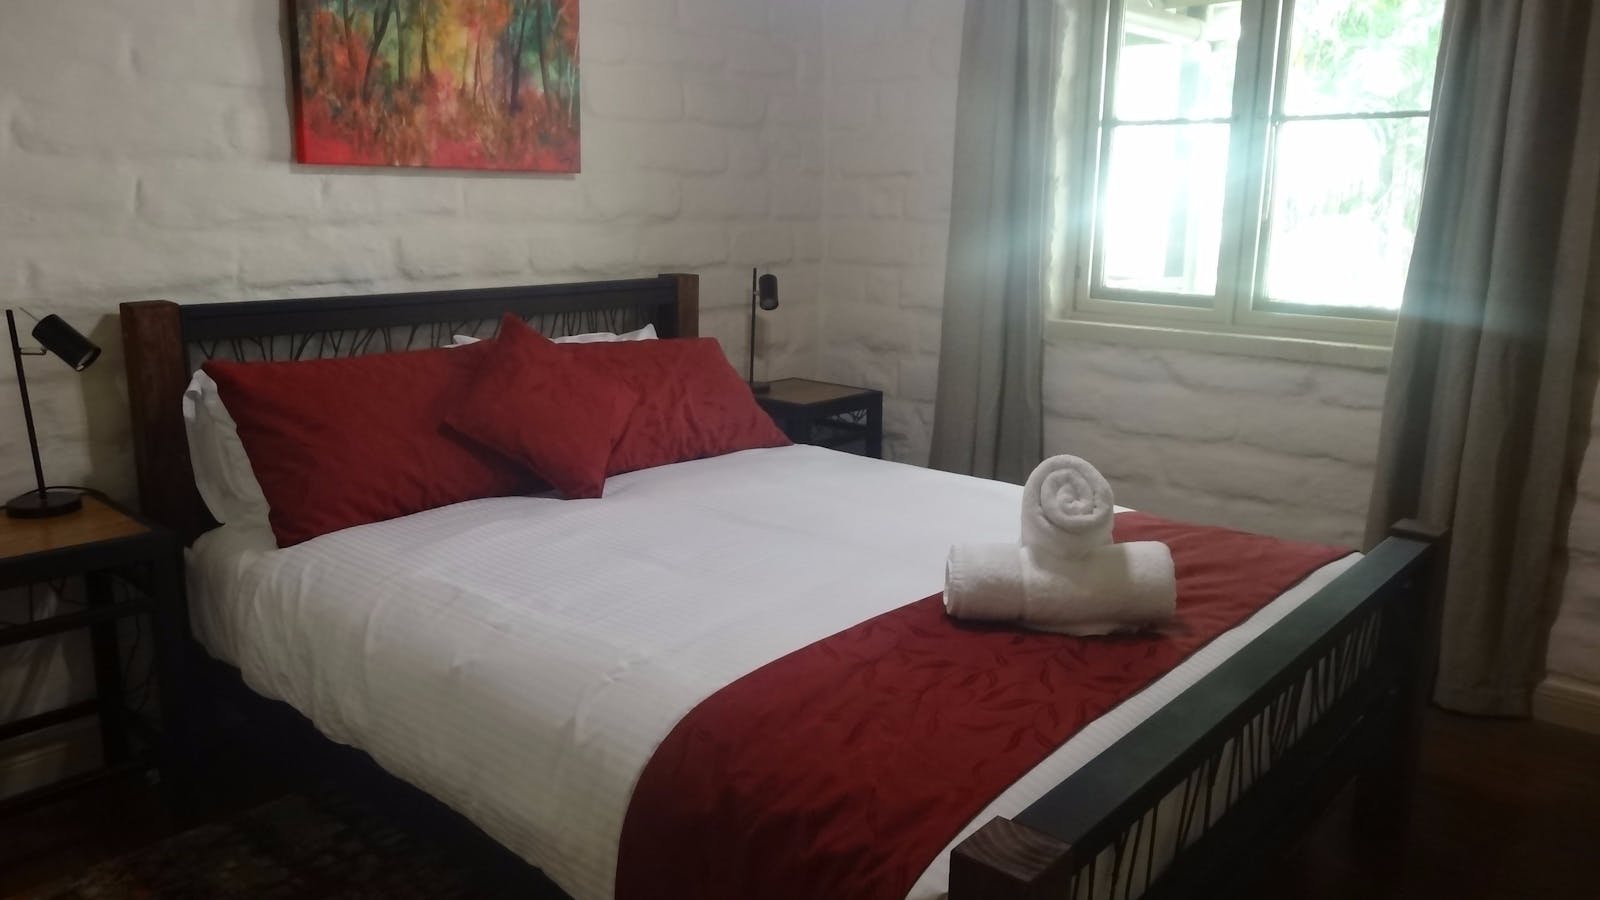 Example of bedrooms at Shepherds Gully